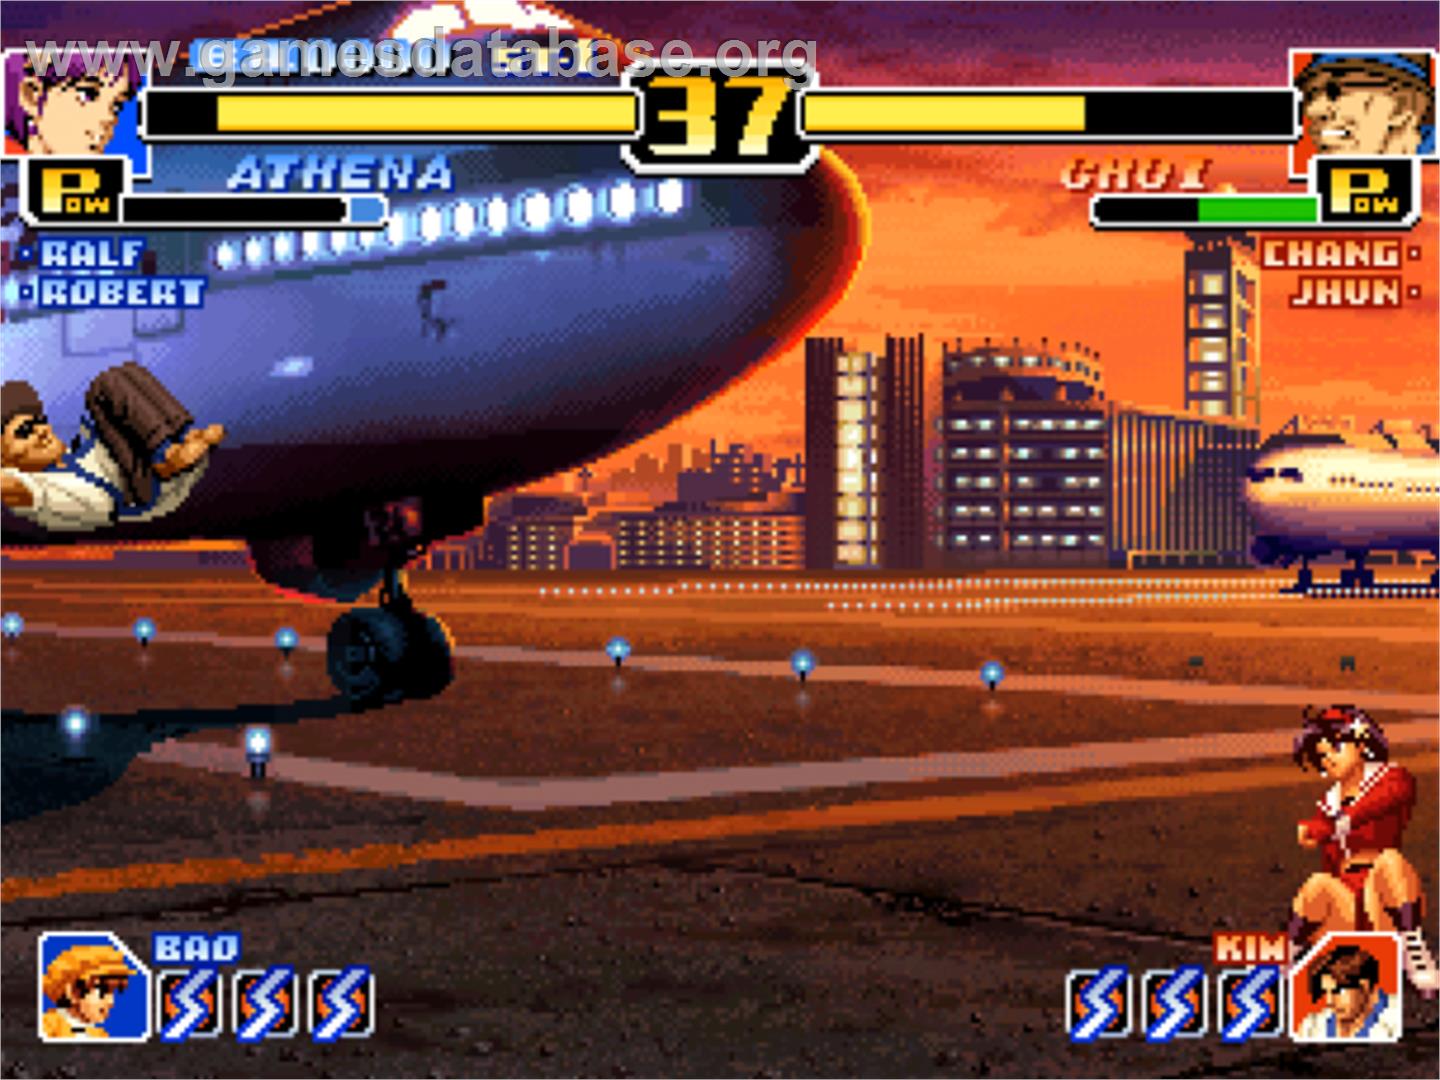 The King of Fighters '99: Millennium Battle - SNK Neo-Geo CD - Artwork - In Game